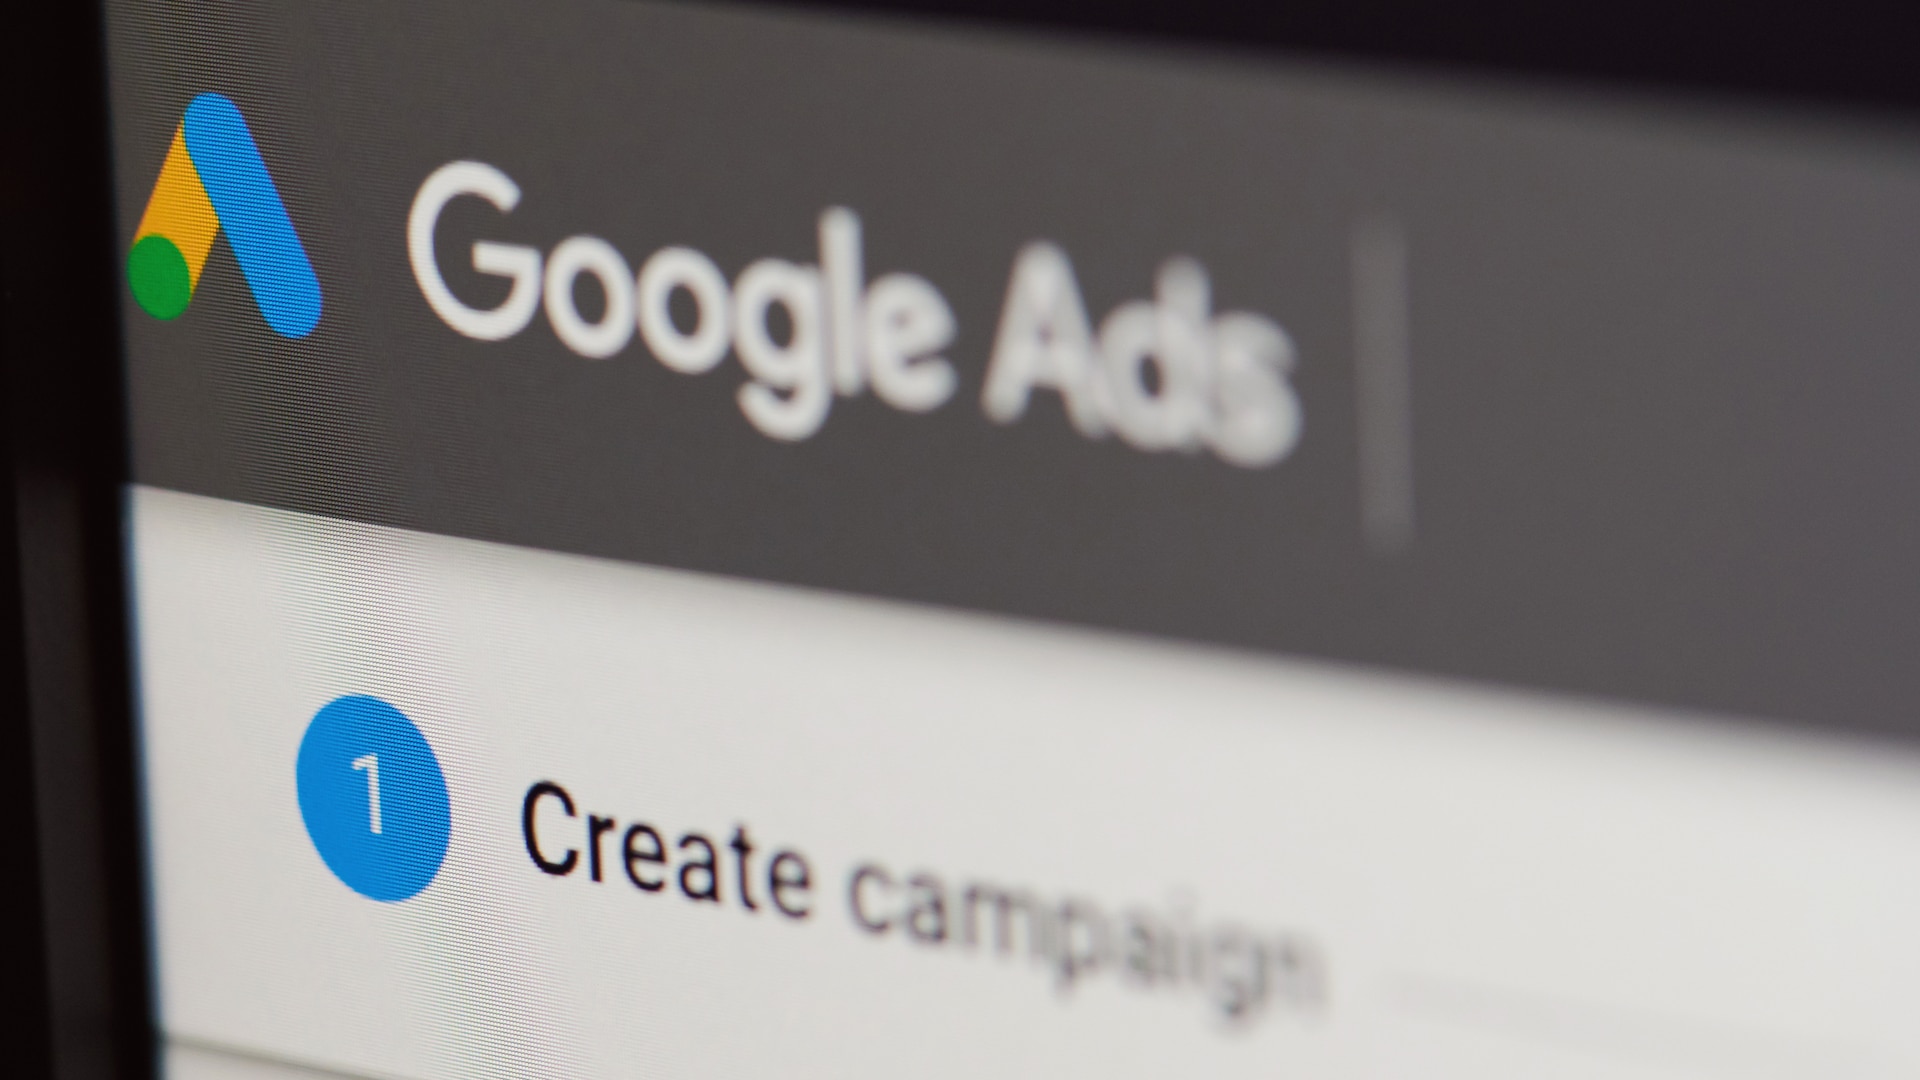 Google Ads Editor version 2.5 rolls out with 16 new features